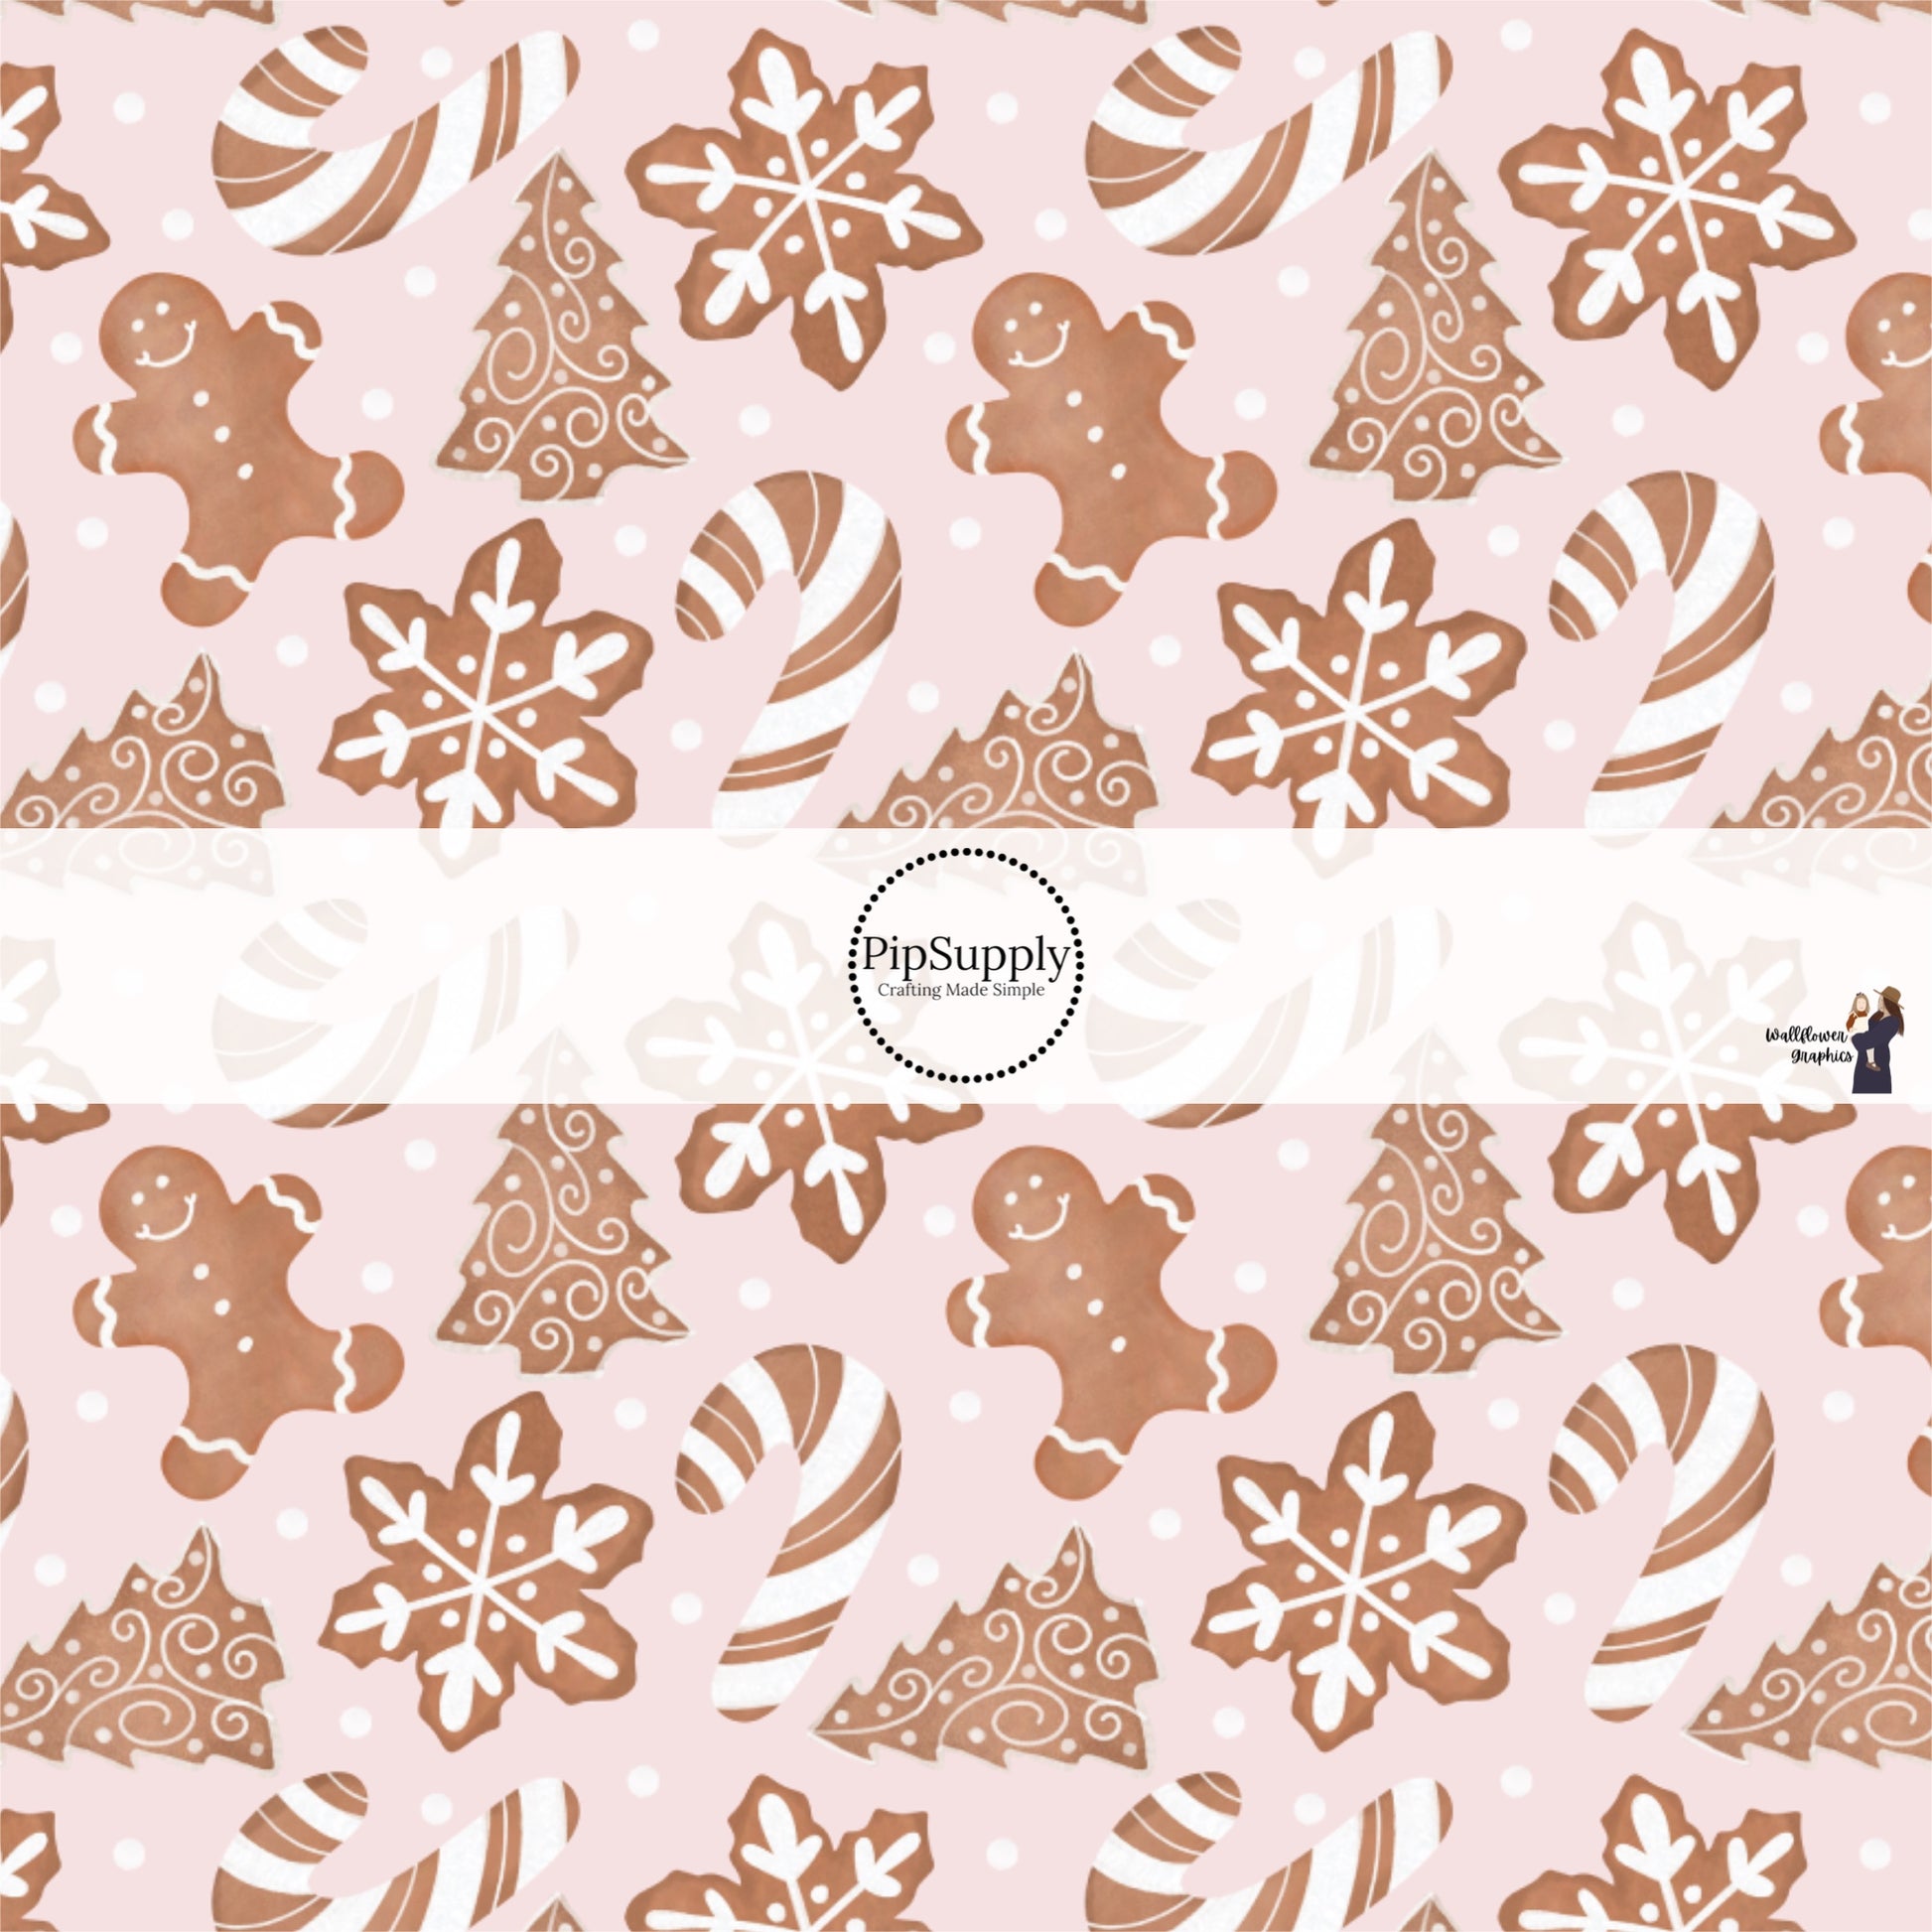 These holiday pattern themed fabric by the yard features iced gingerbread cookies on light pink. This fun Christmas fabric can be used for all your sewing and crafting needs!